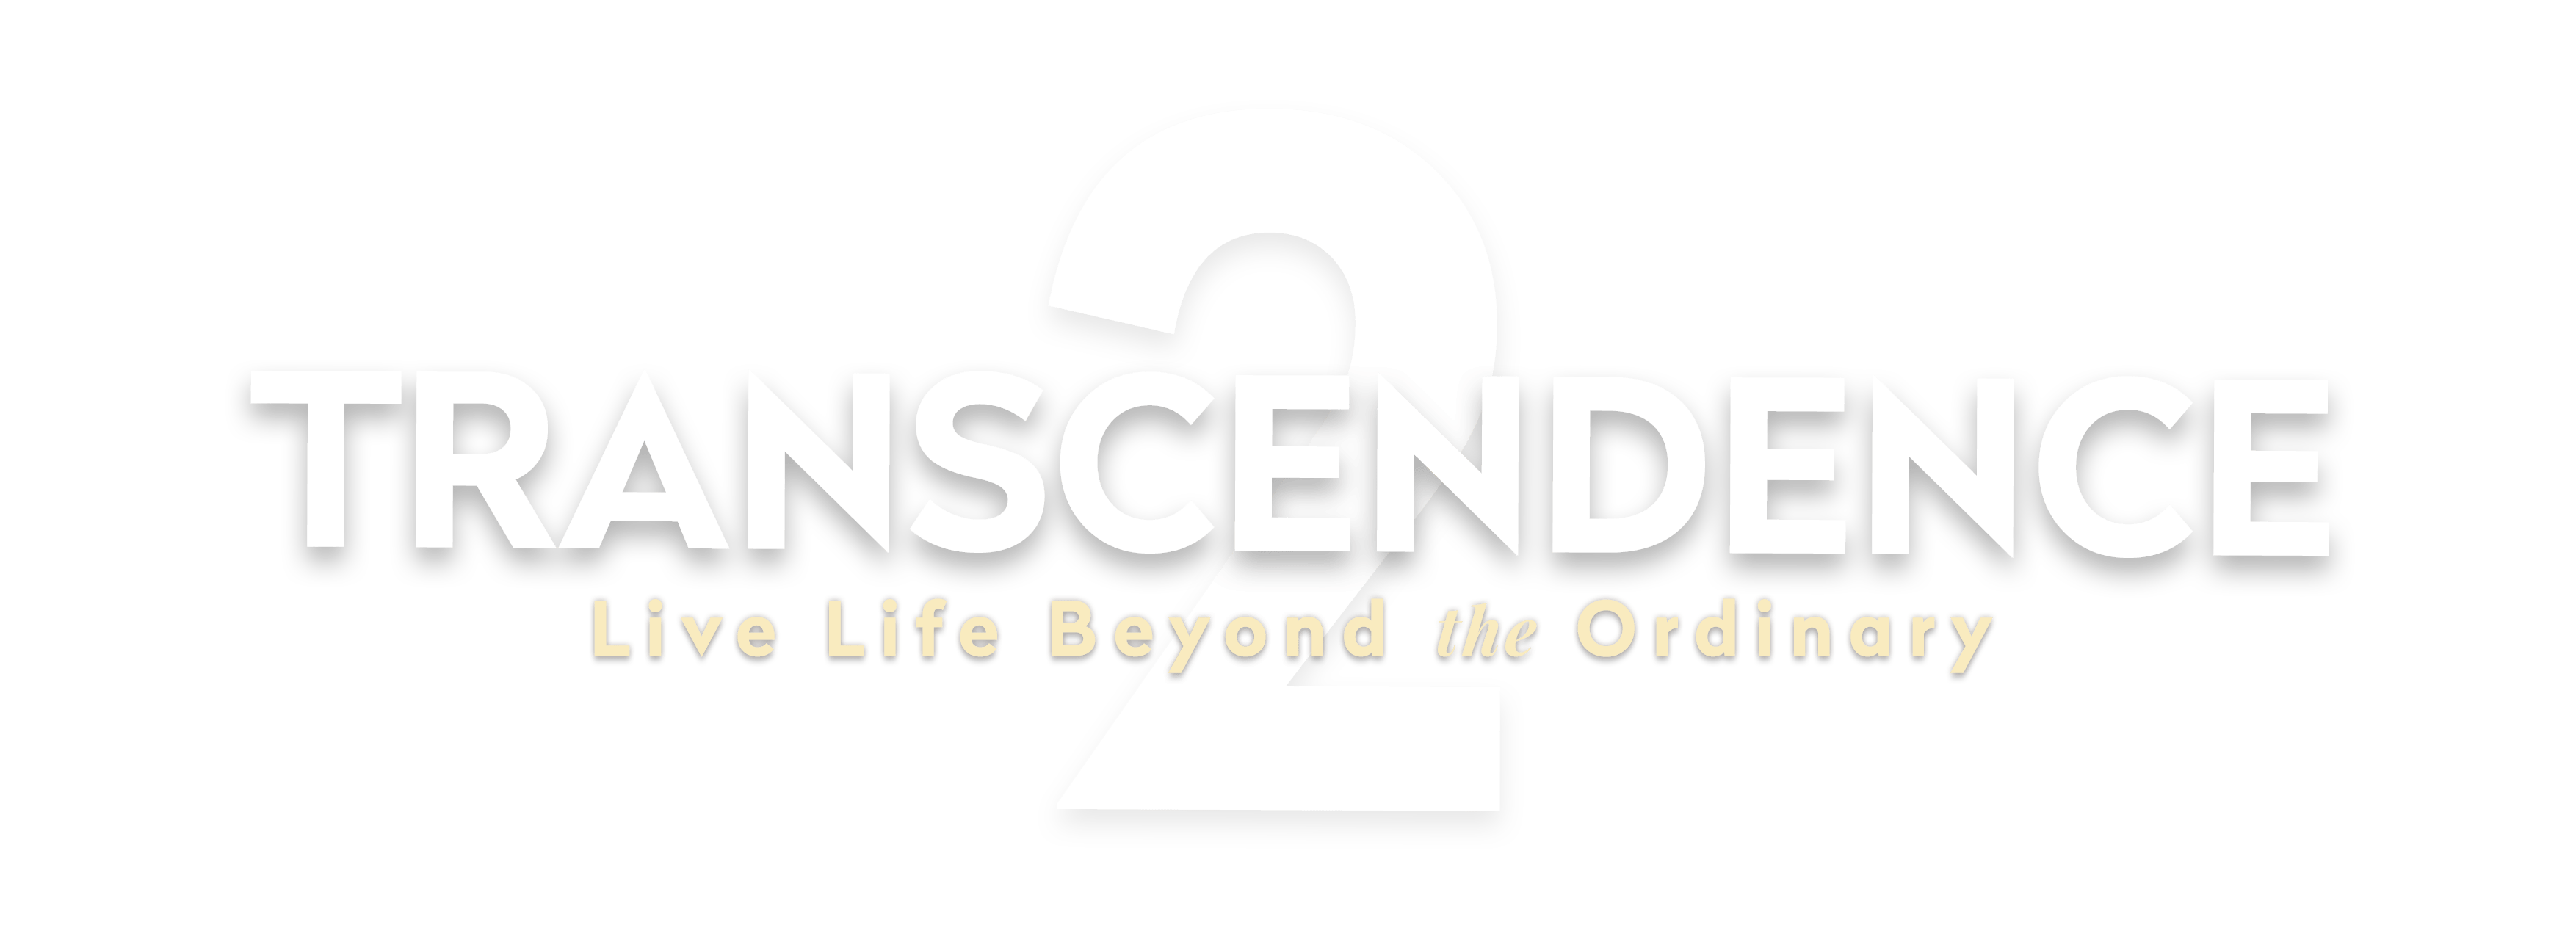 TRANSCENDENCE - Live Life Beyond the Ordinary